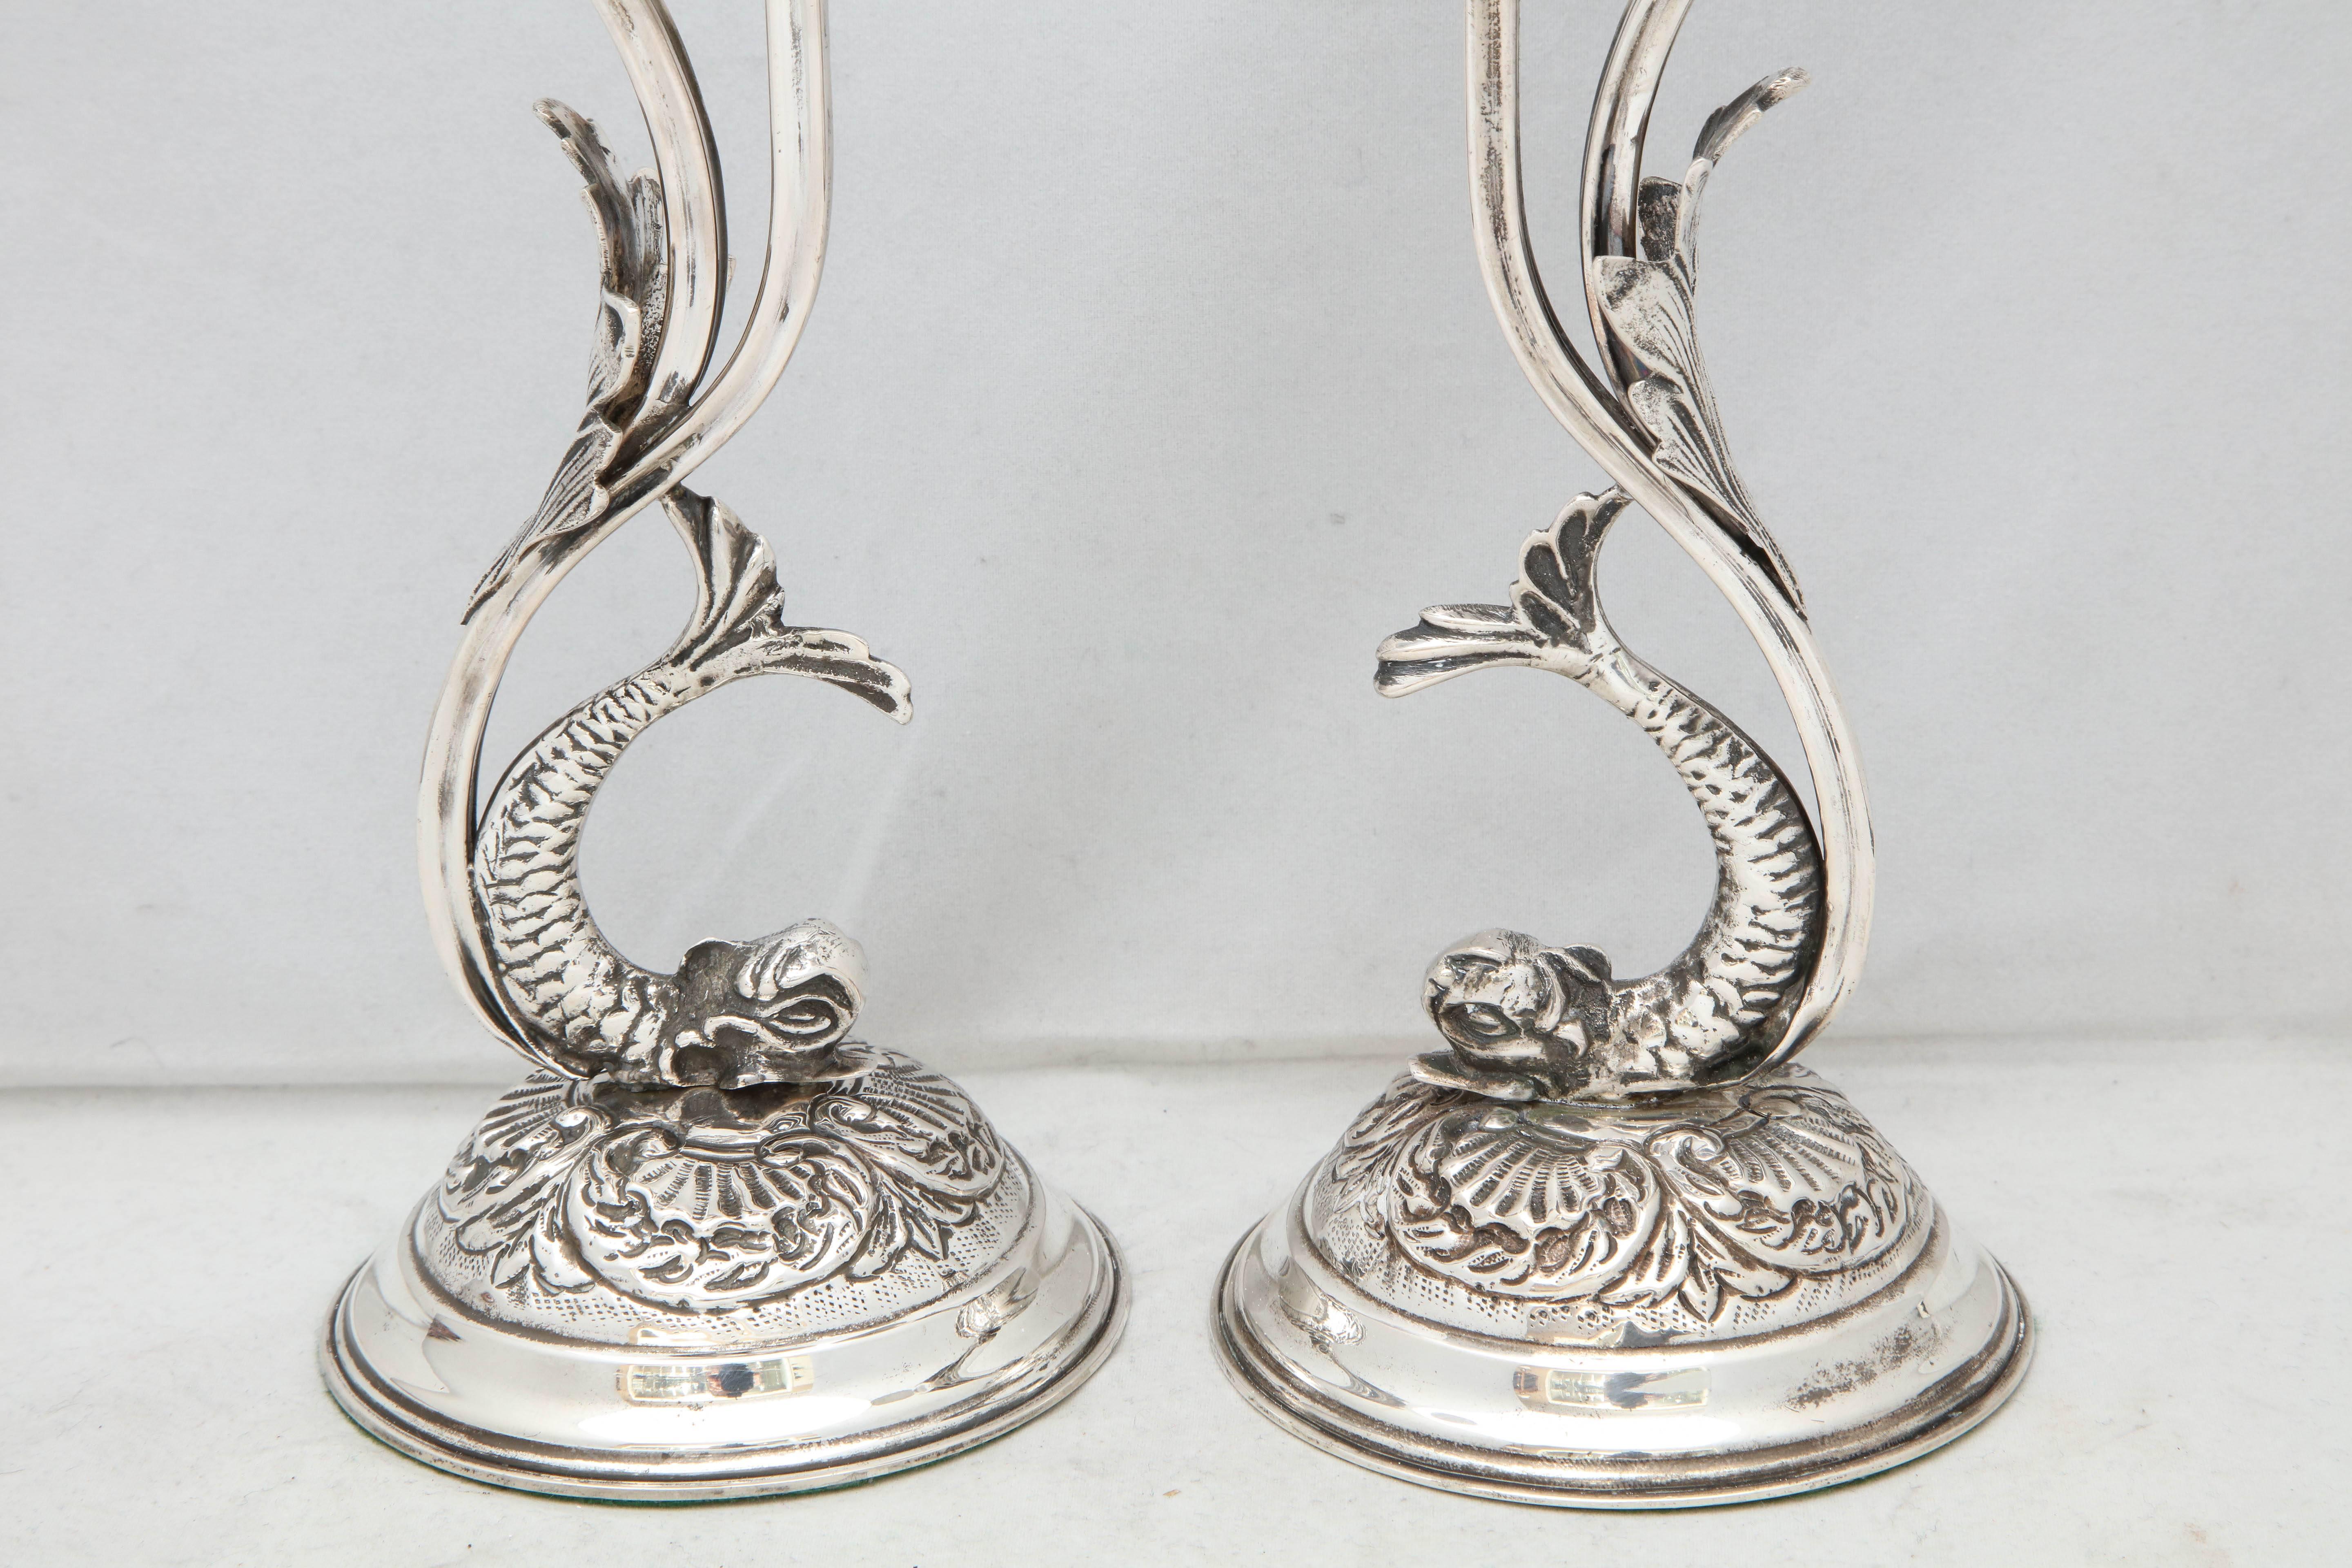 European  Pair of Art Nouveau Style Continental Silver Dolphin-Form Candlestick